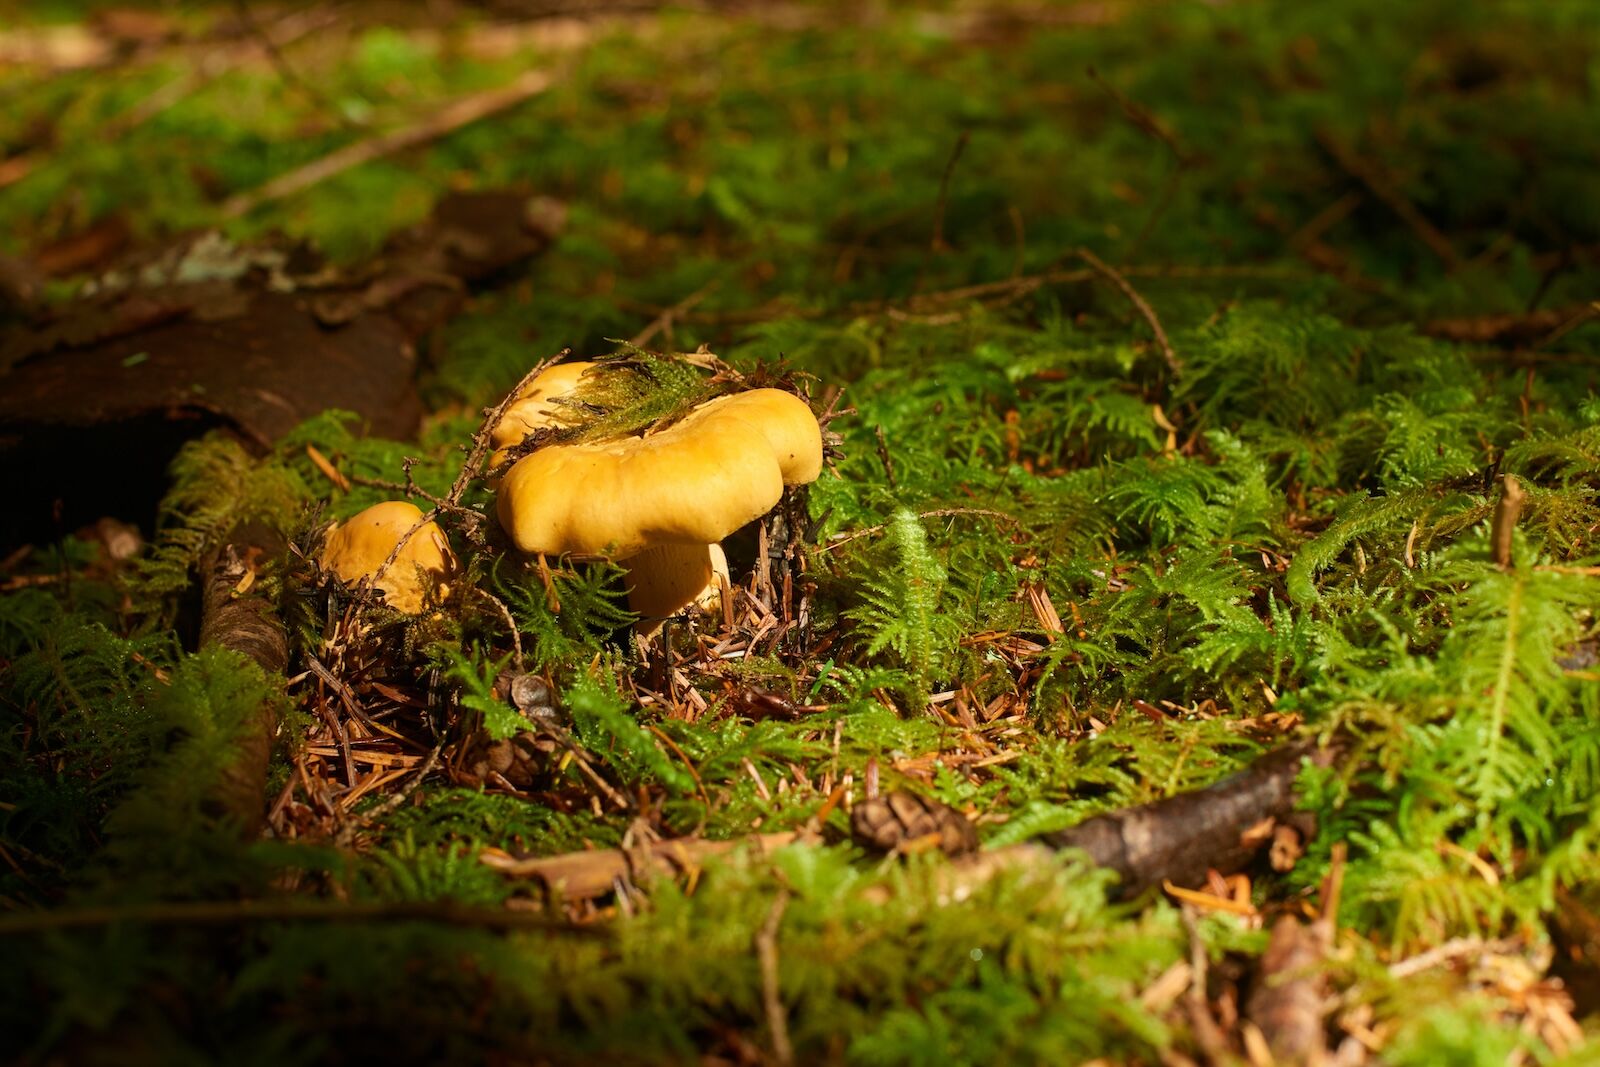 Yellow chanterelles grow out of moss in an Oregon forest.